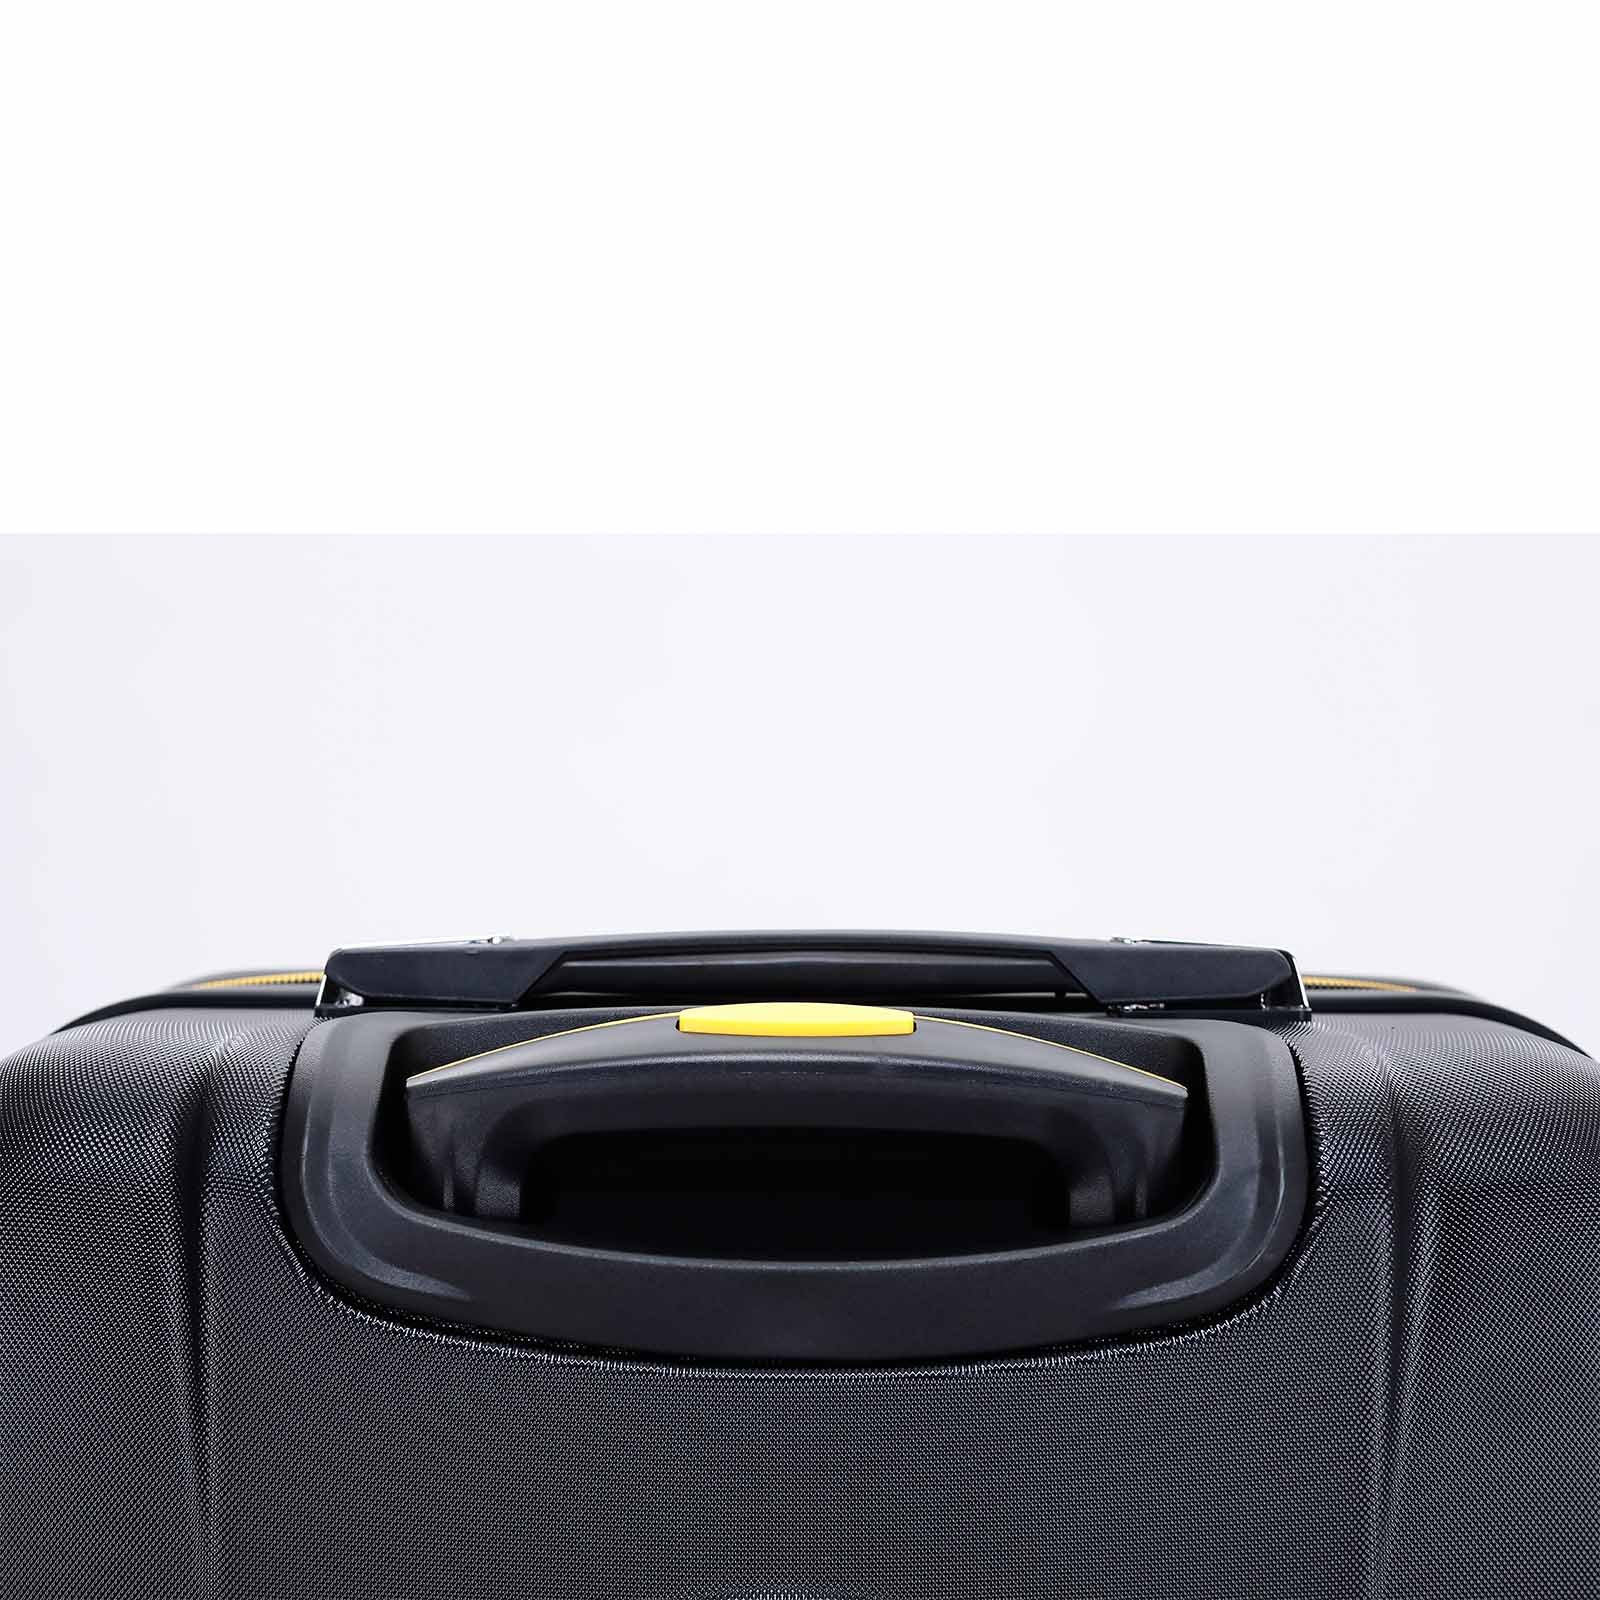 Warner Brothers Batman 19inch Carry-On Suitcase